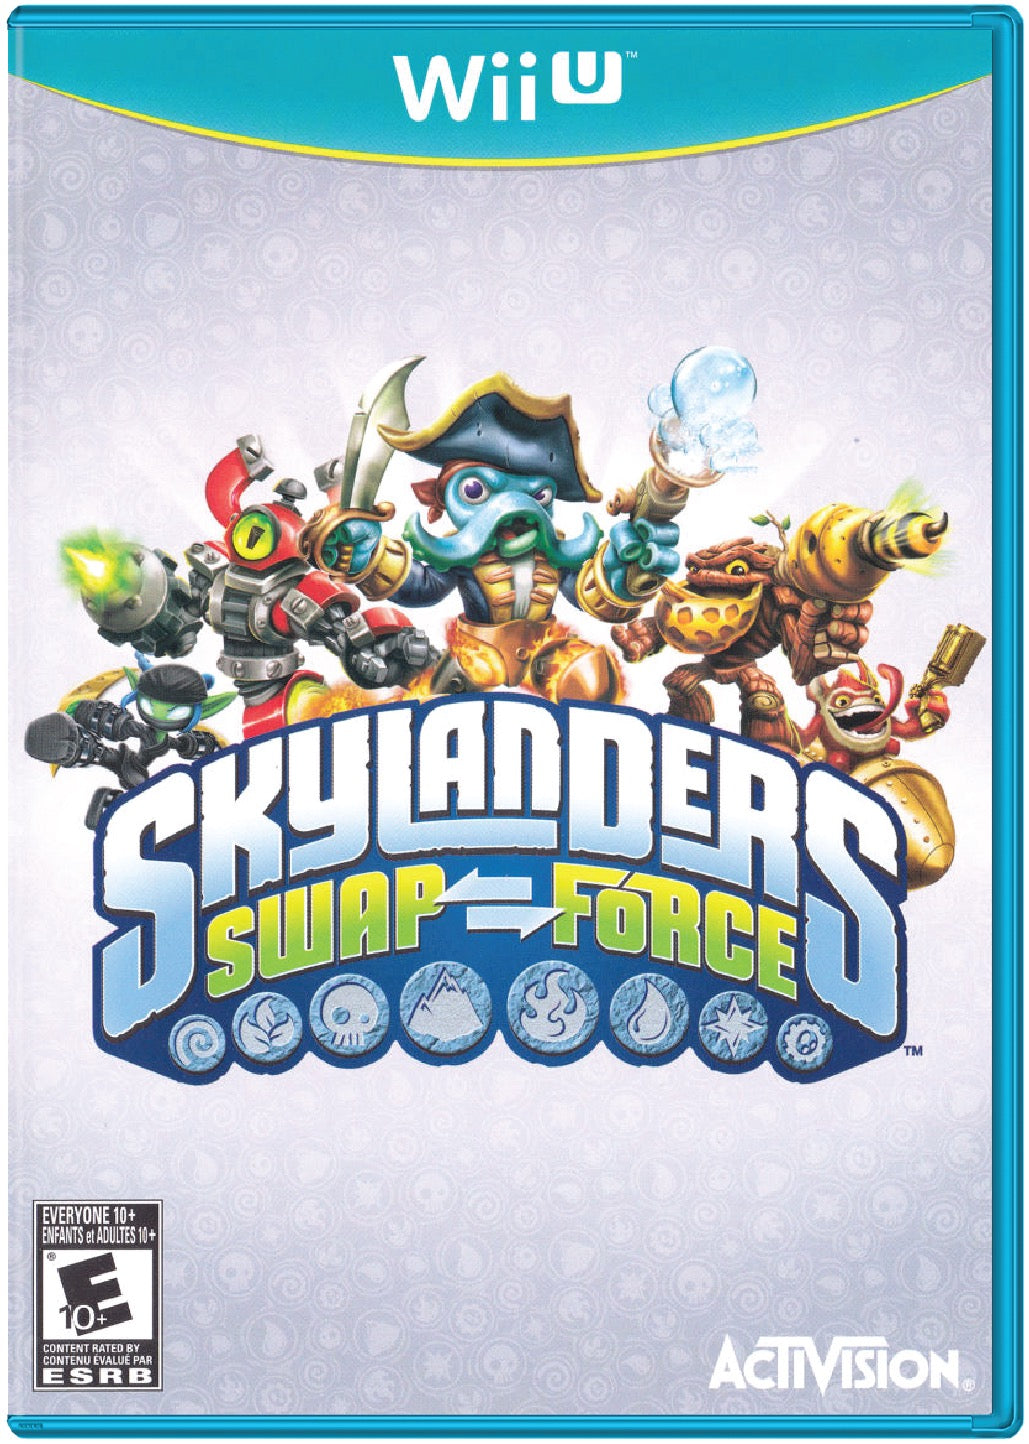 Skylanders Swap Force Cover Art and Product Photo